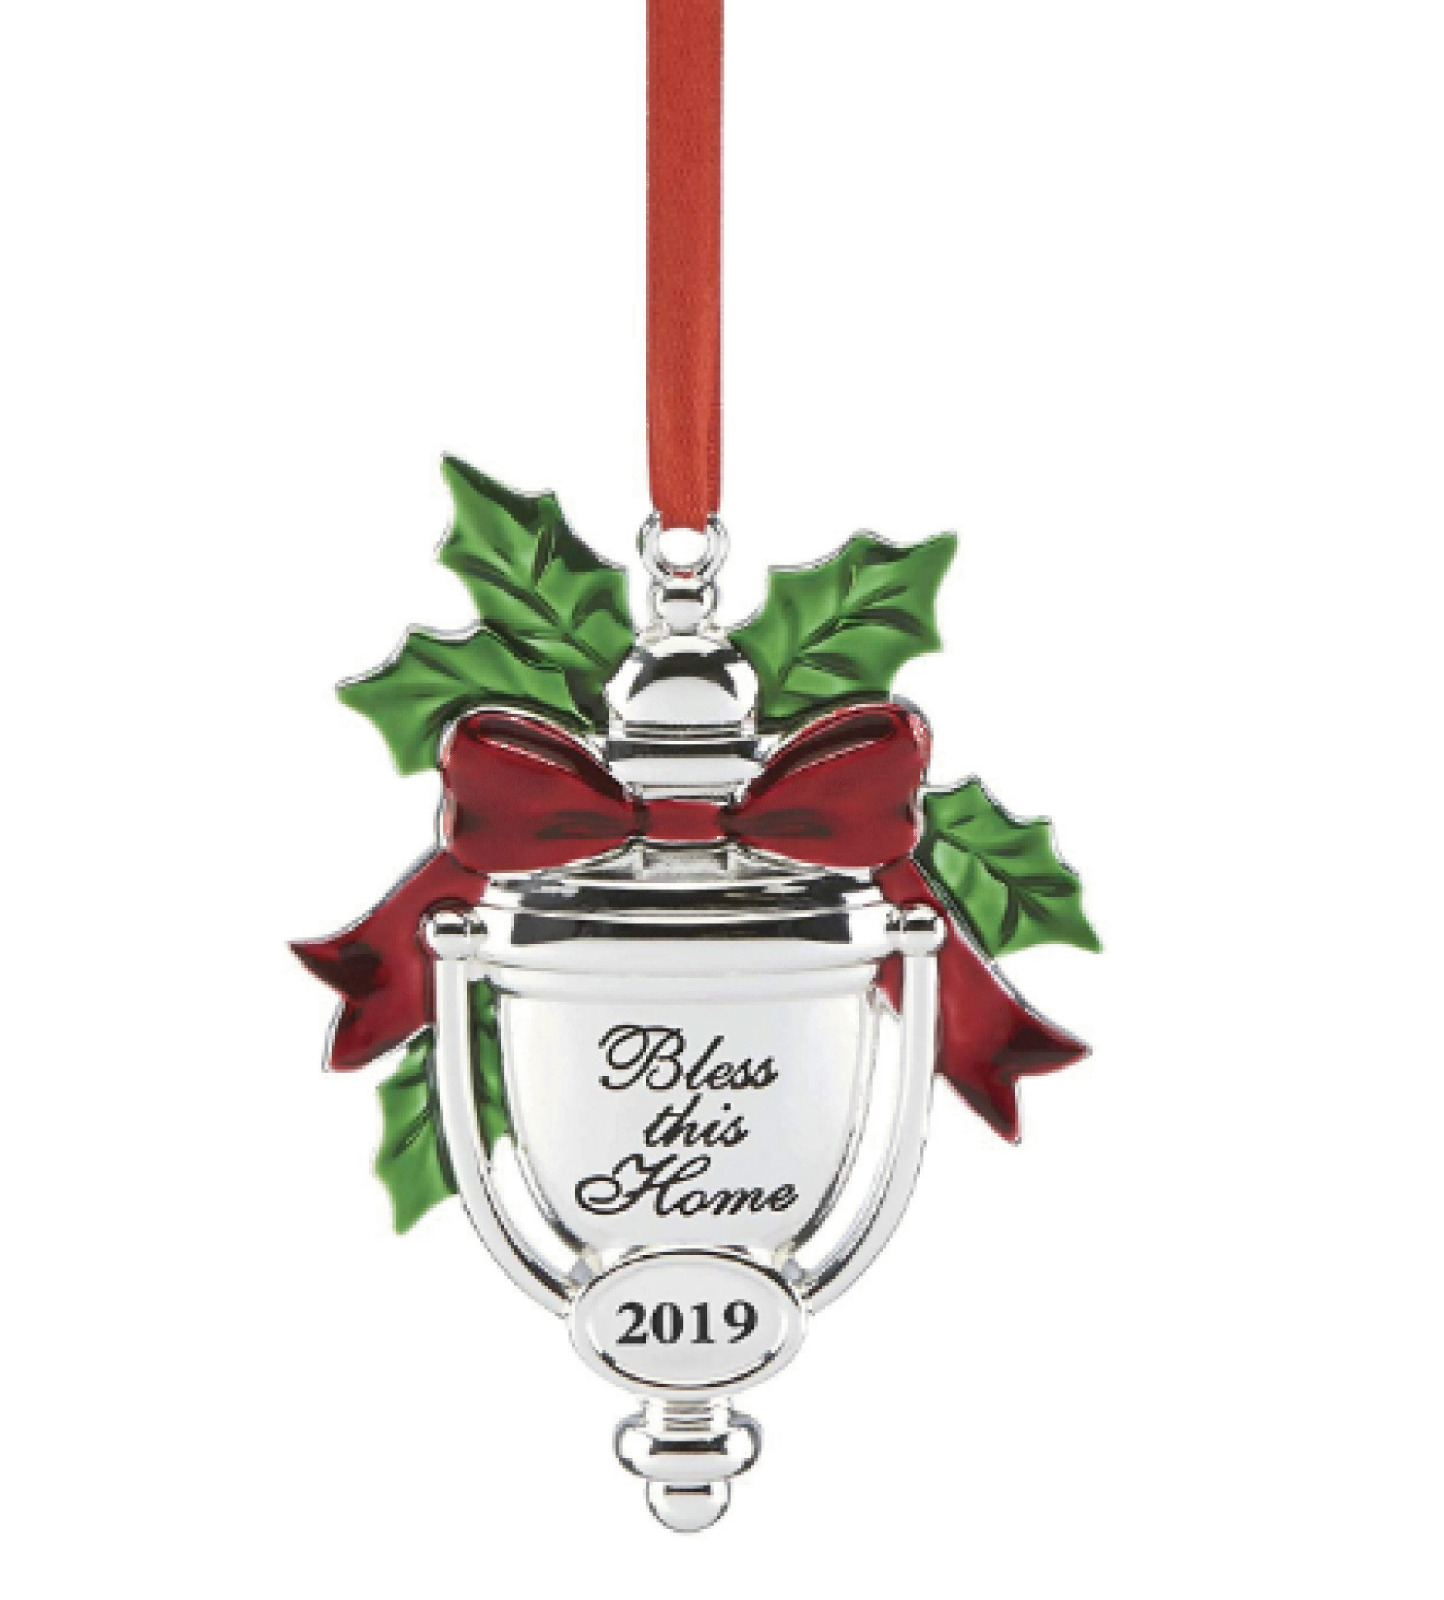 Lenox 2019 Bless This Home Ornament  